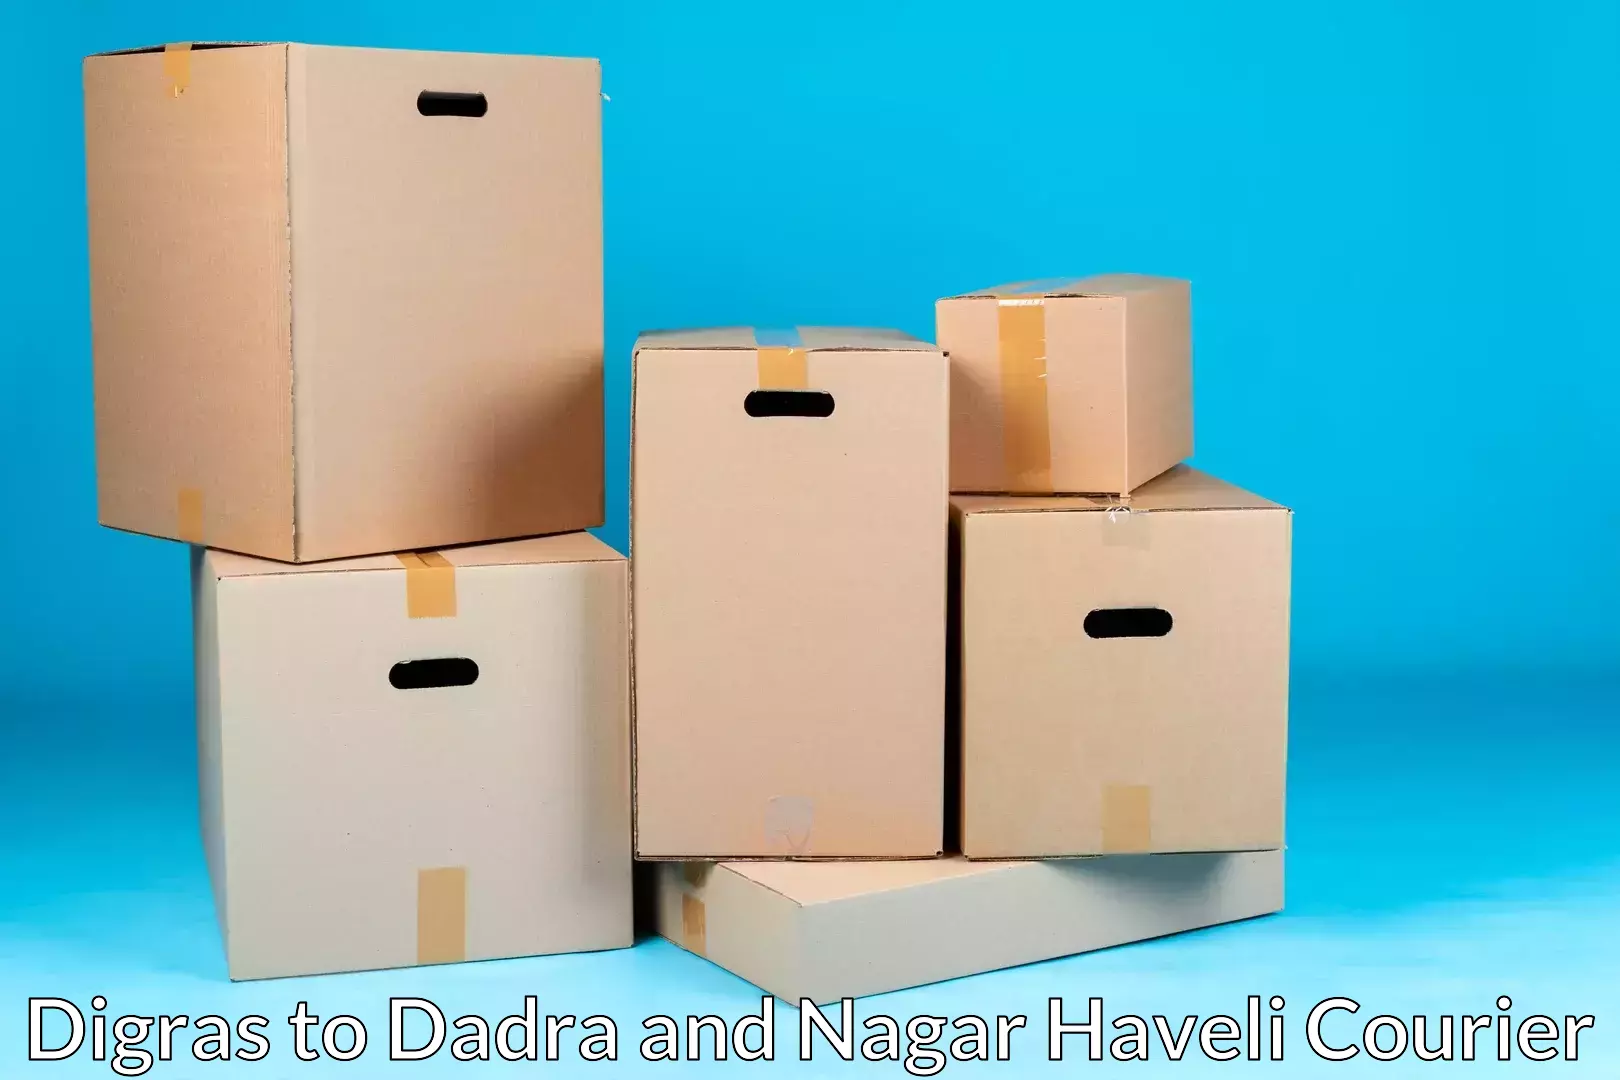 Moving and packing experts Digras to Silvassa